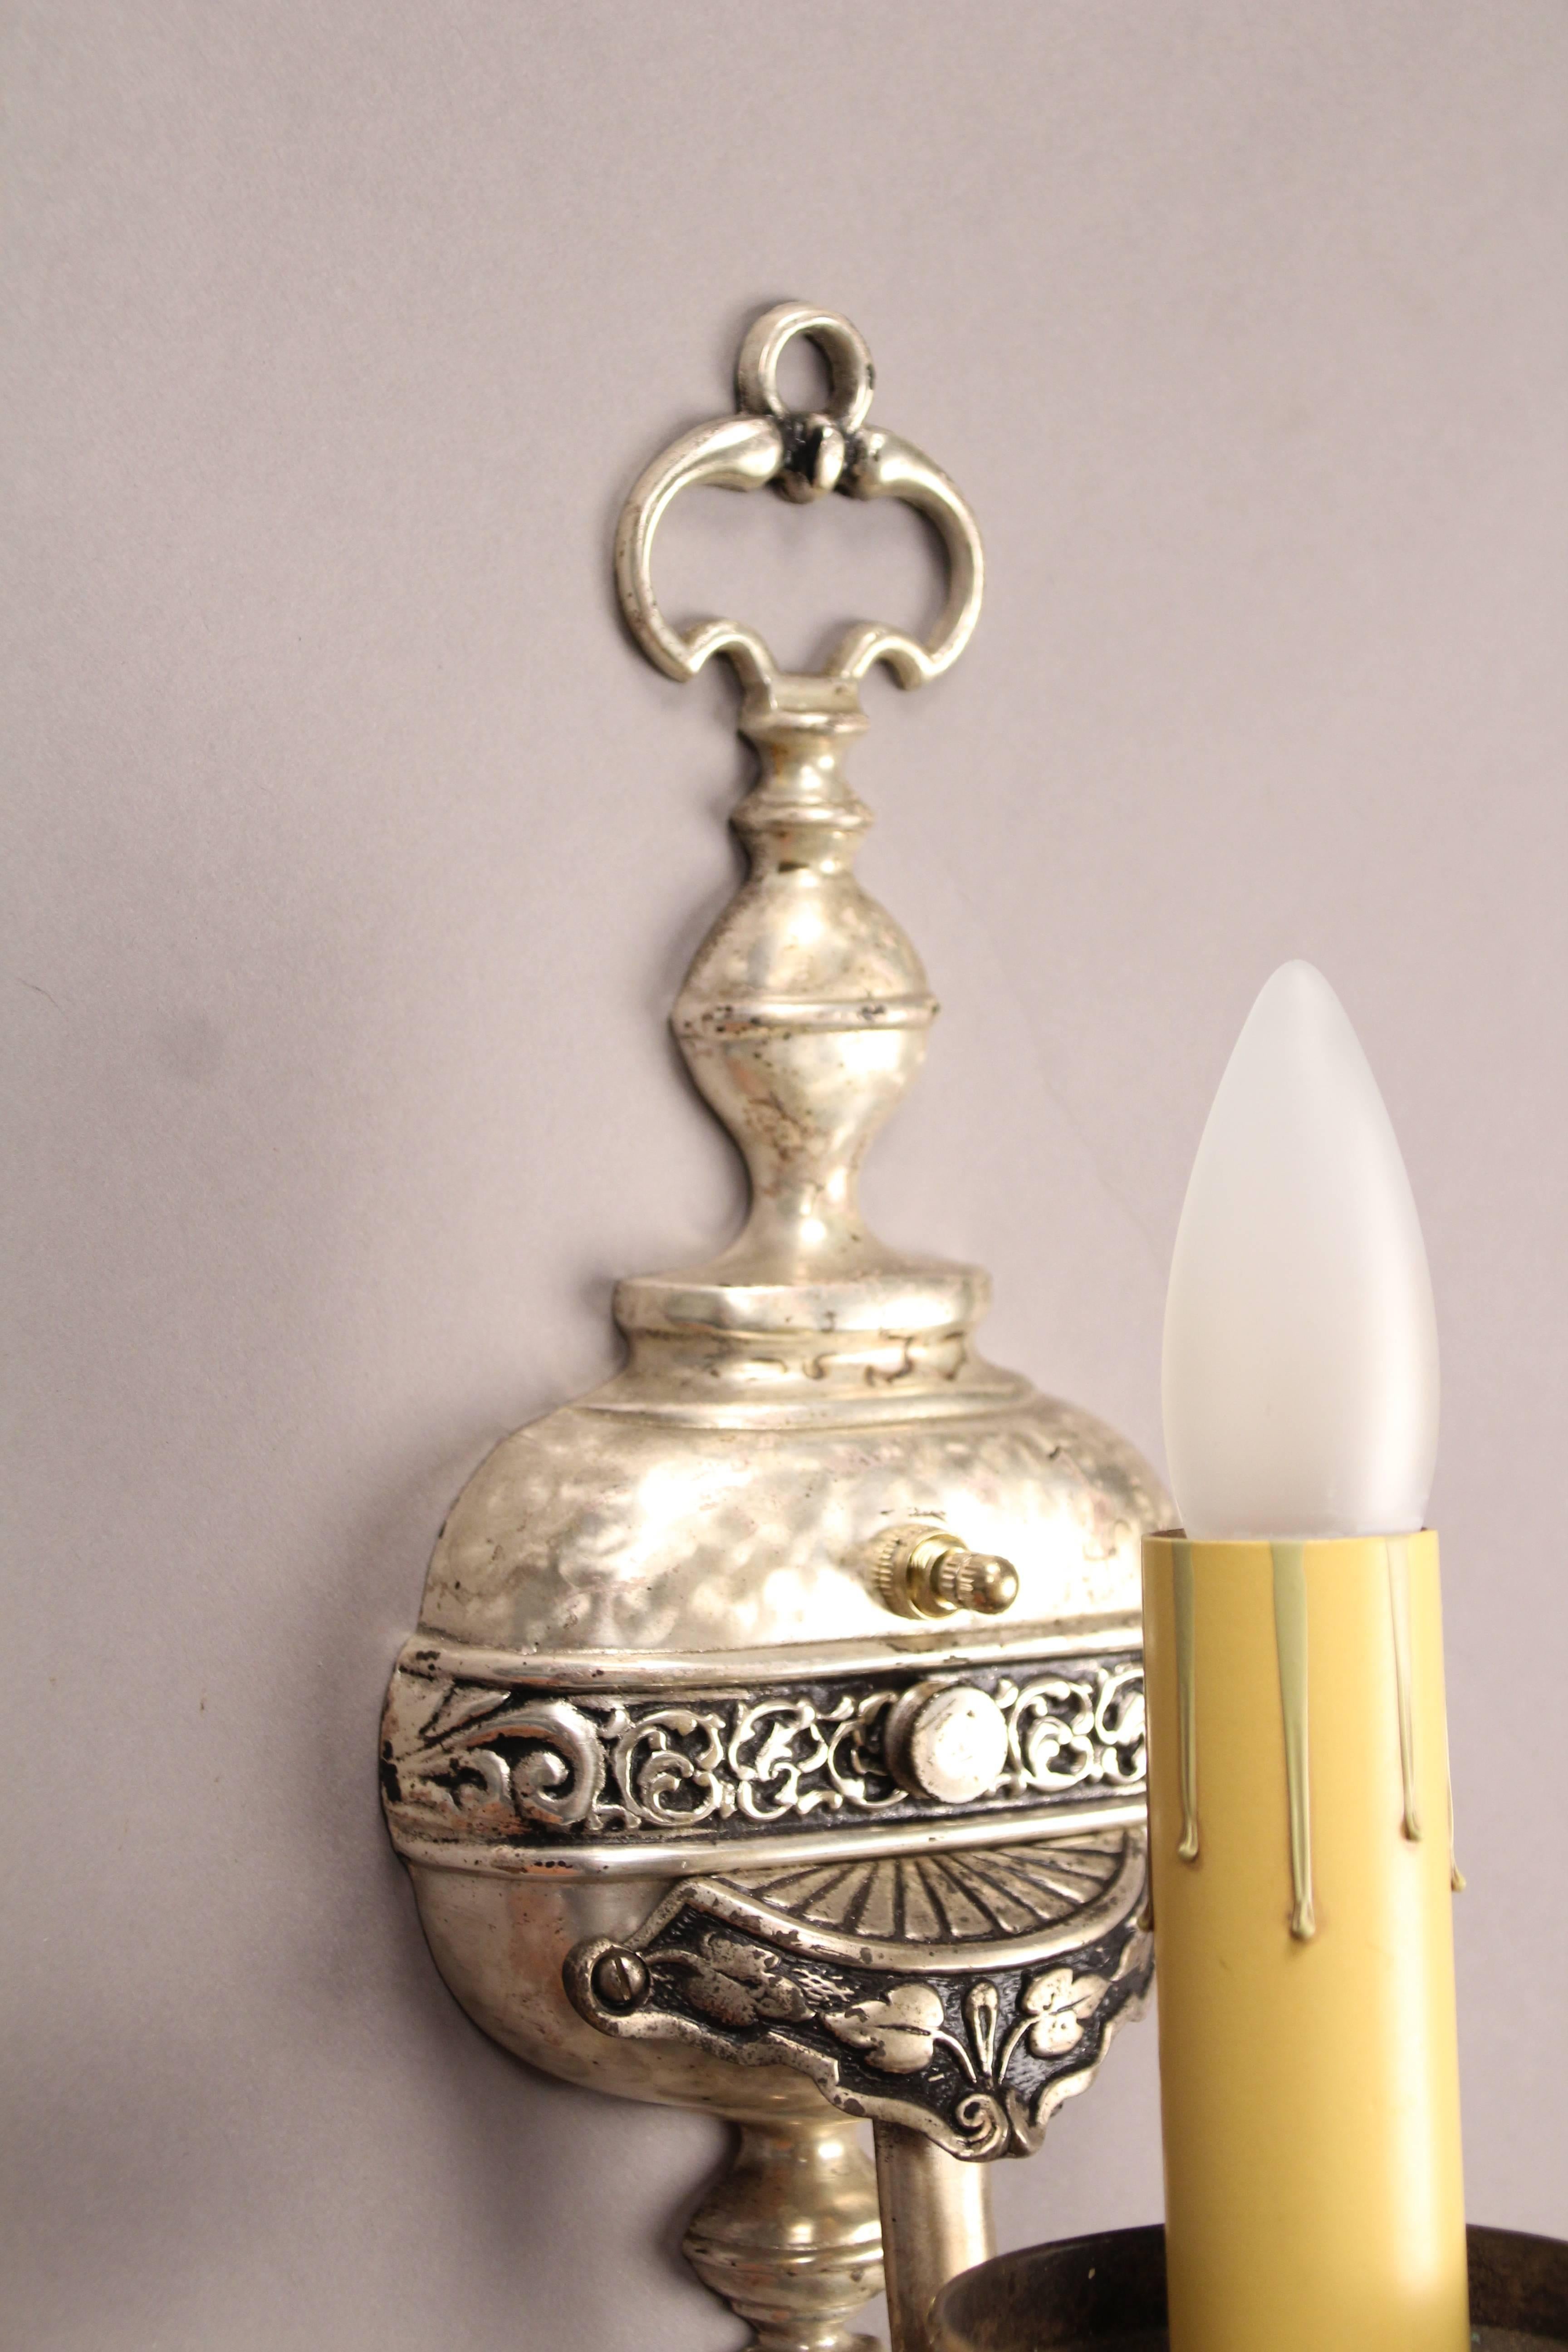 North American 1 of 5 Elegant Silver Toned 1920s Sconce